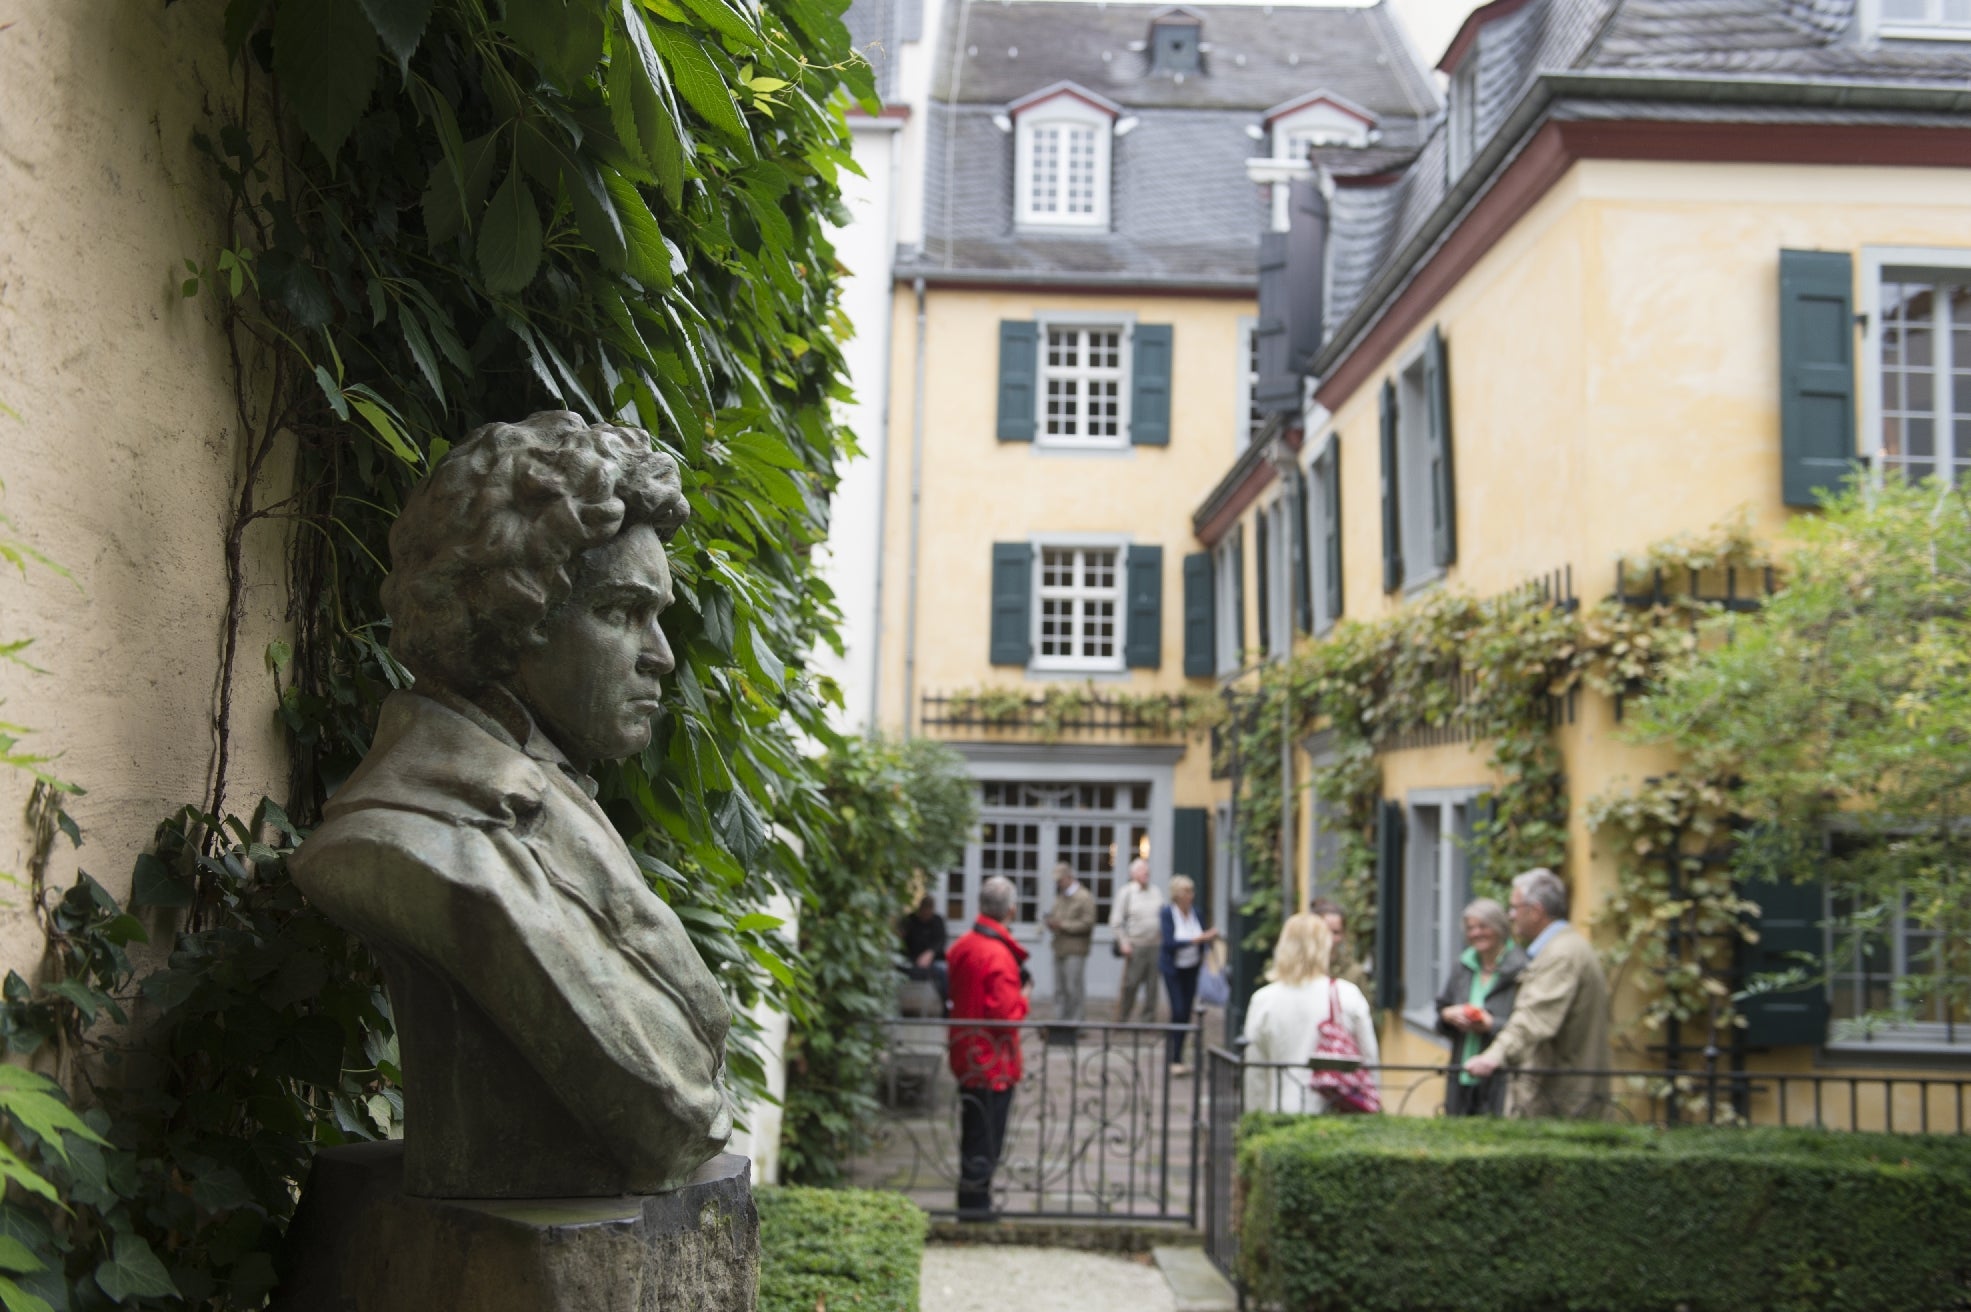 The beethoven house is one of the most important sights in Bonn and was founded in 1889